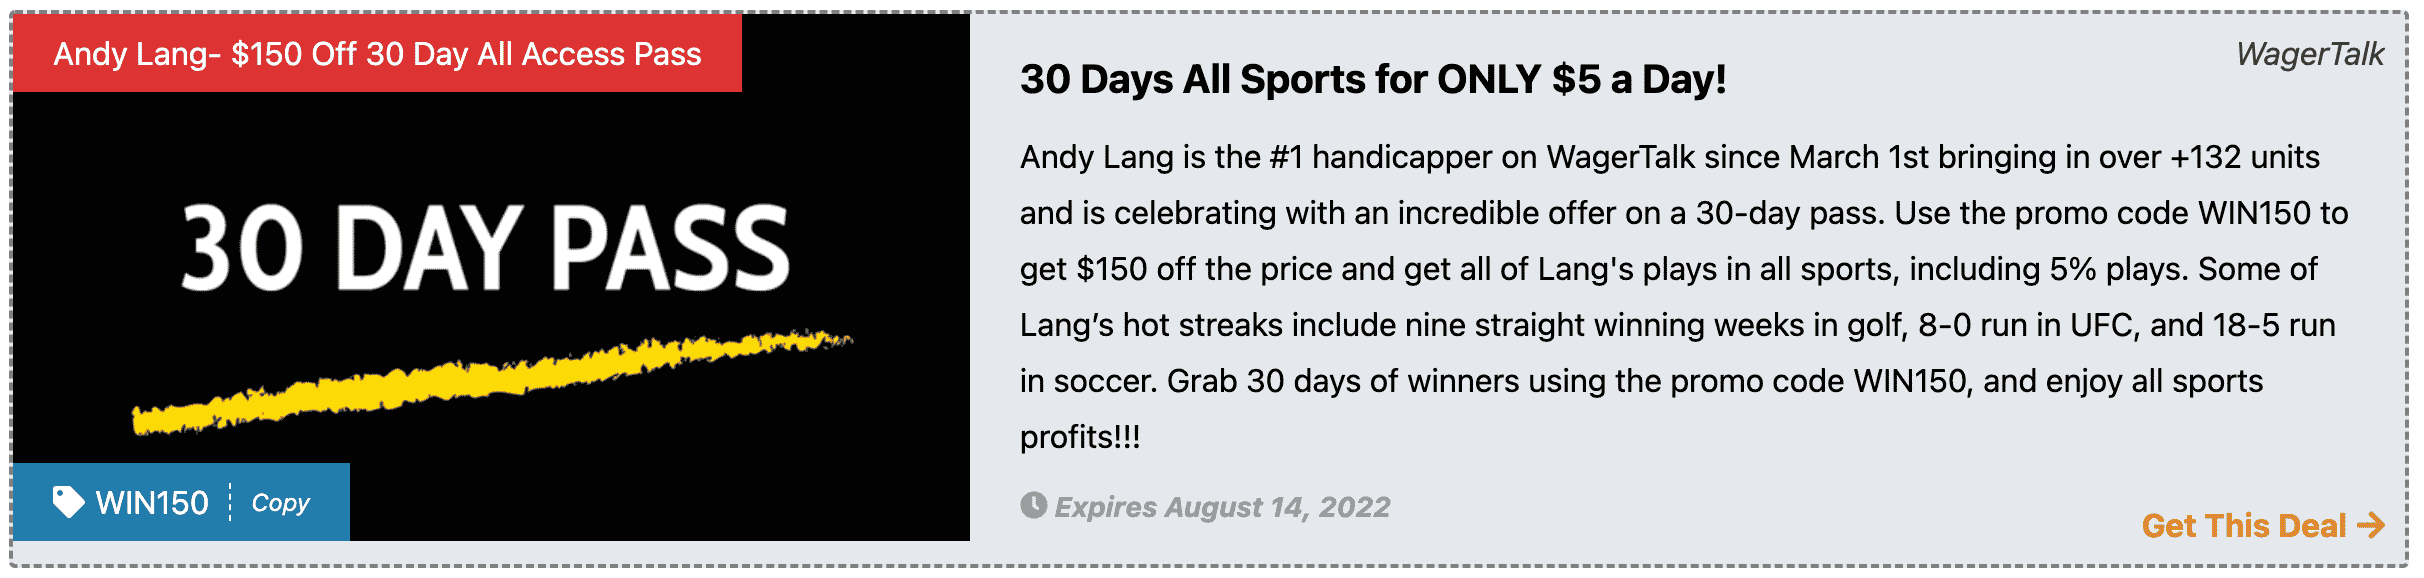 Andy Lang Special